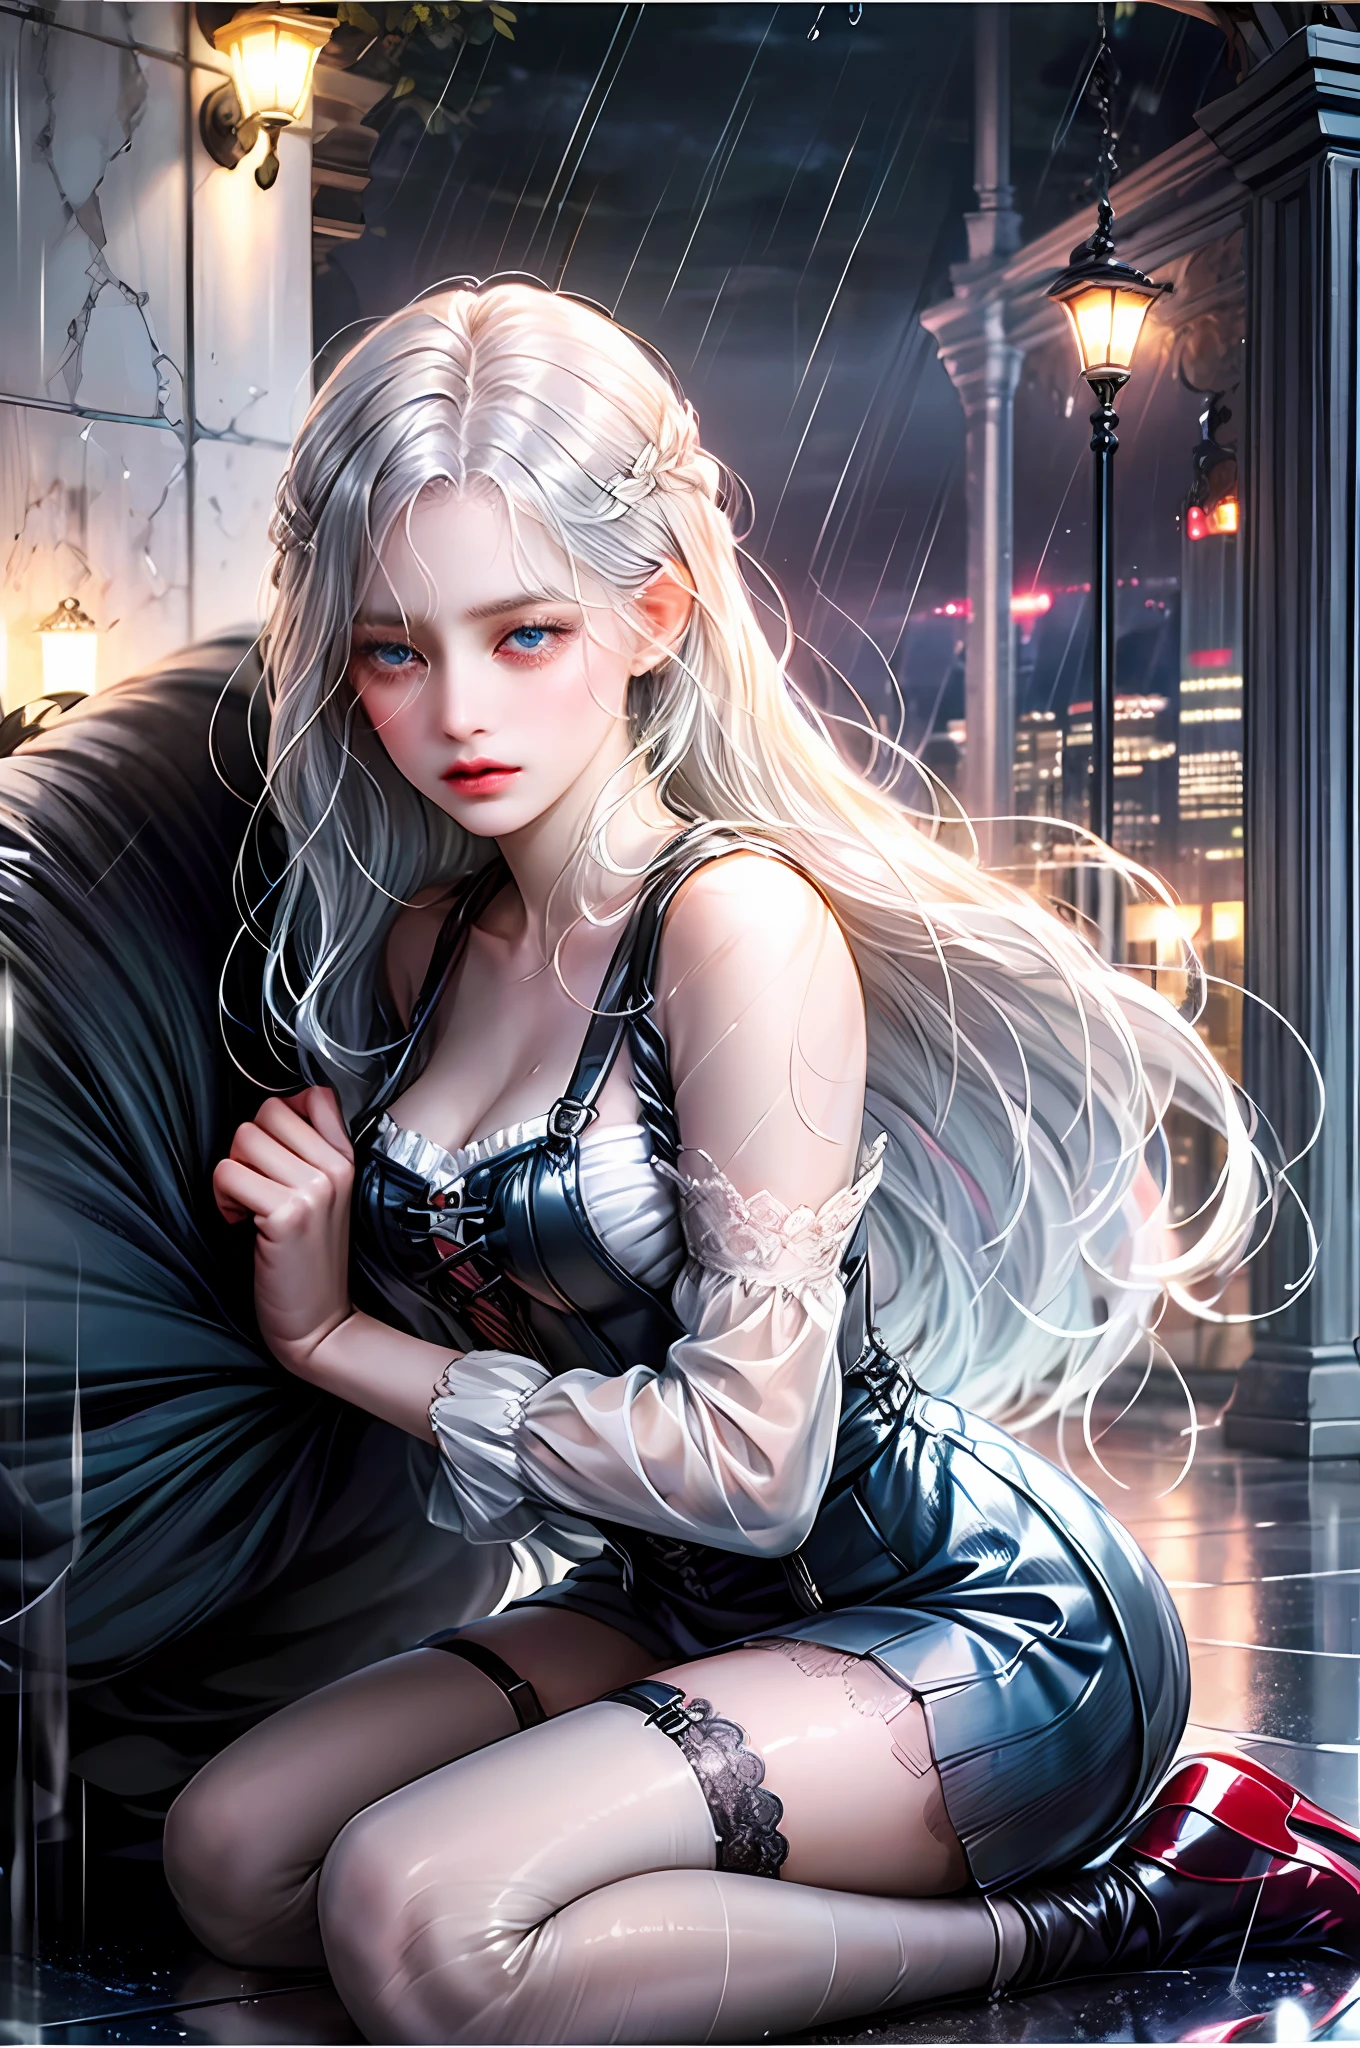 1 girl, anime style, kneeling, hivering, feeling cold, shivering, transparent suspender stockings, leg straps, short skirt, (long white hair), blue eyes, rain-soaked top, rainy day, heartache expression --auto